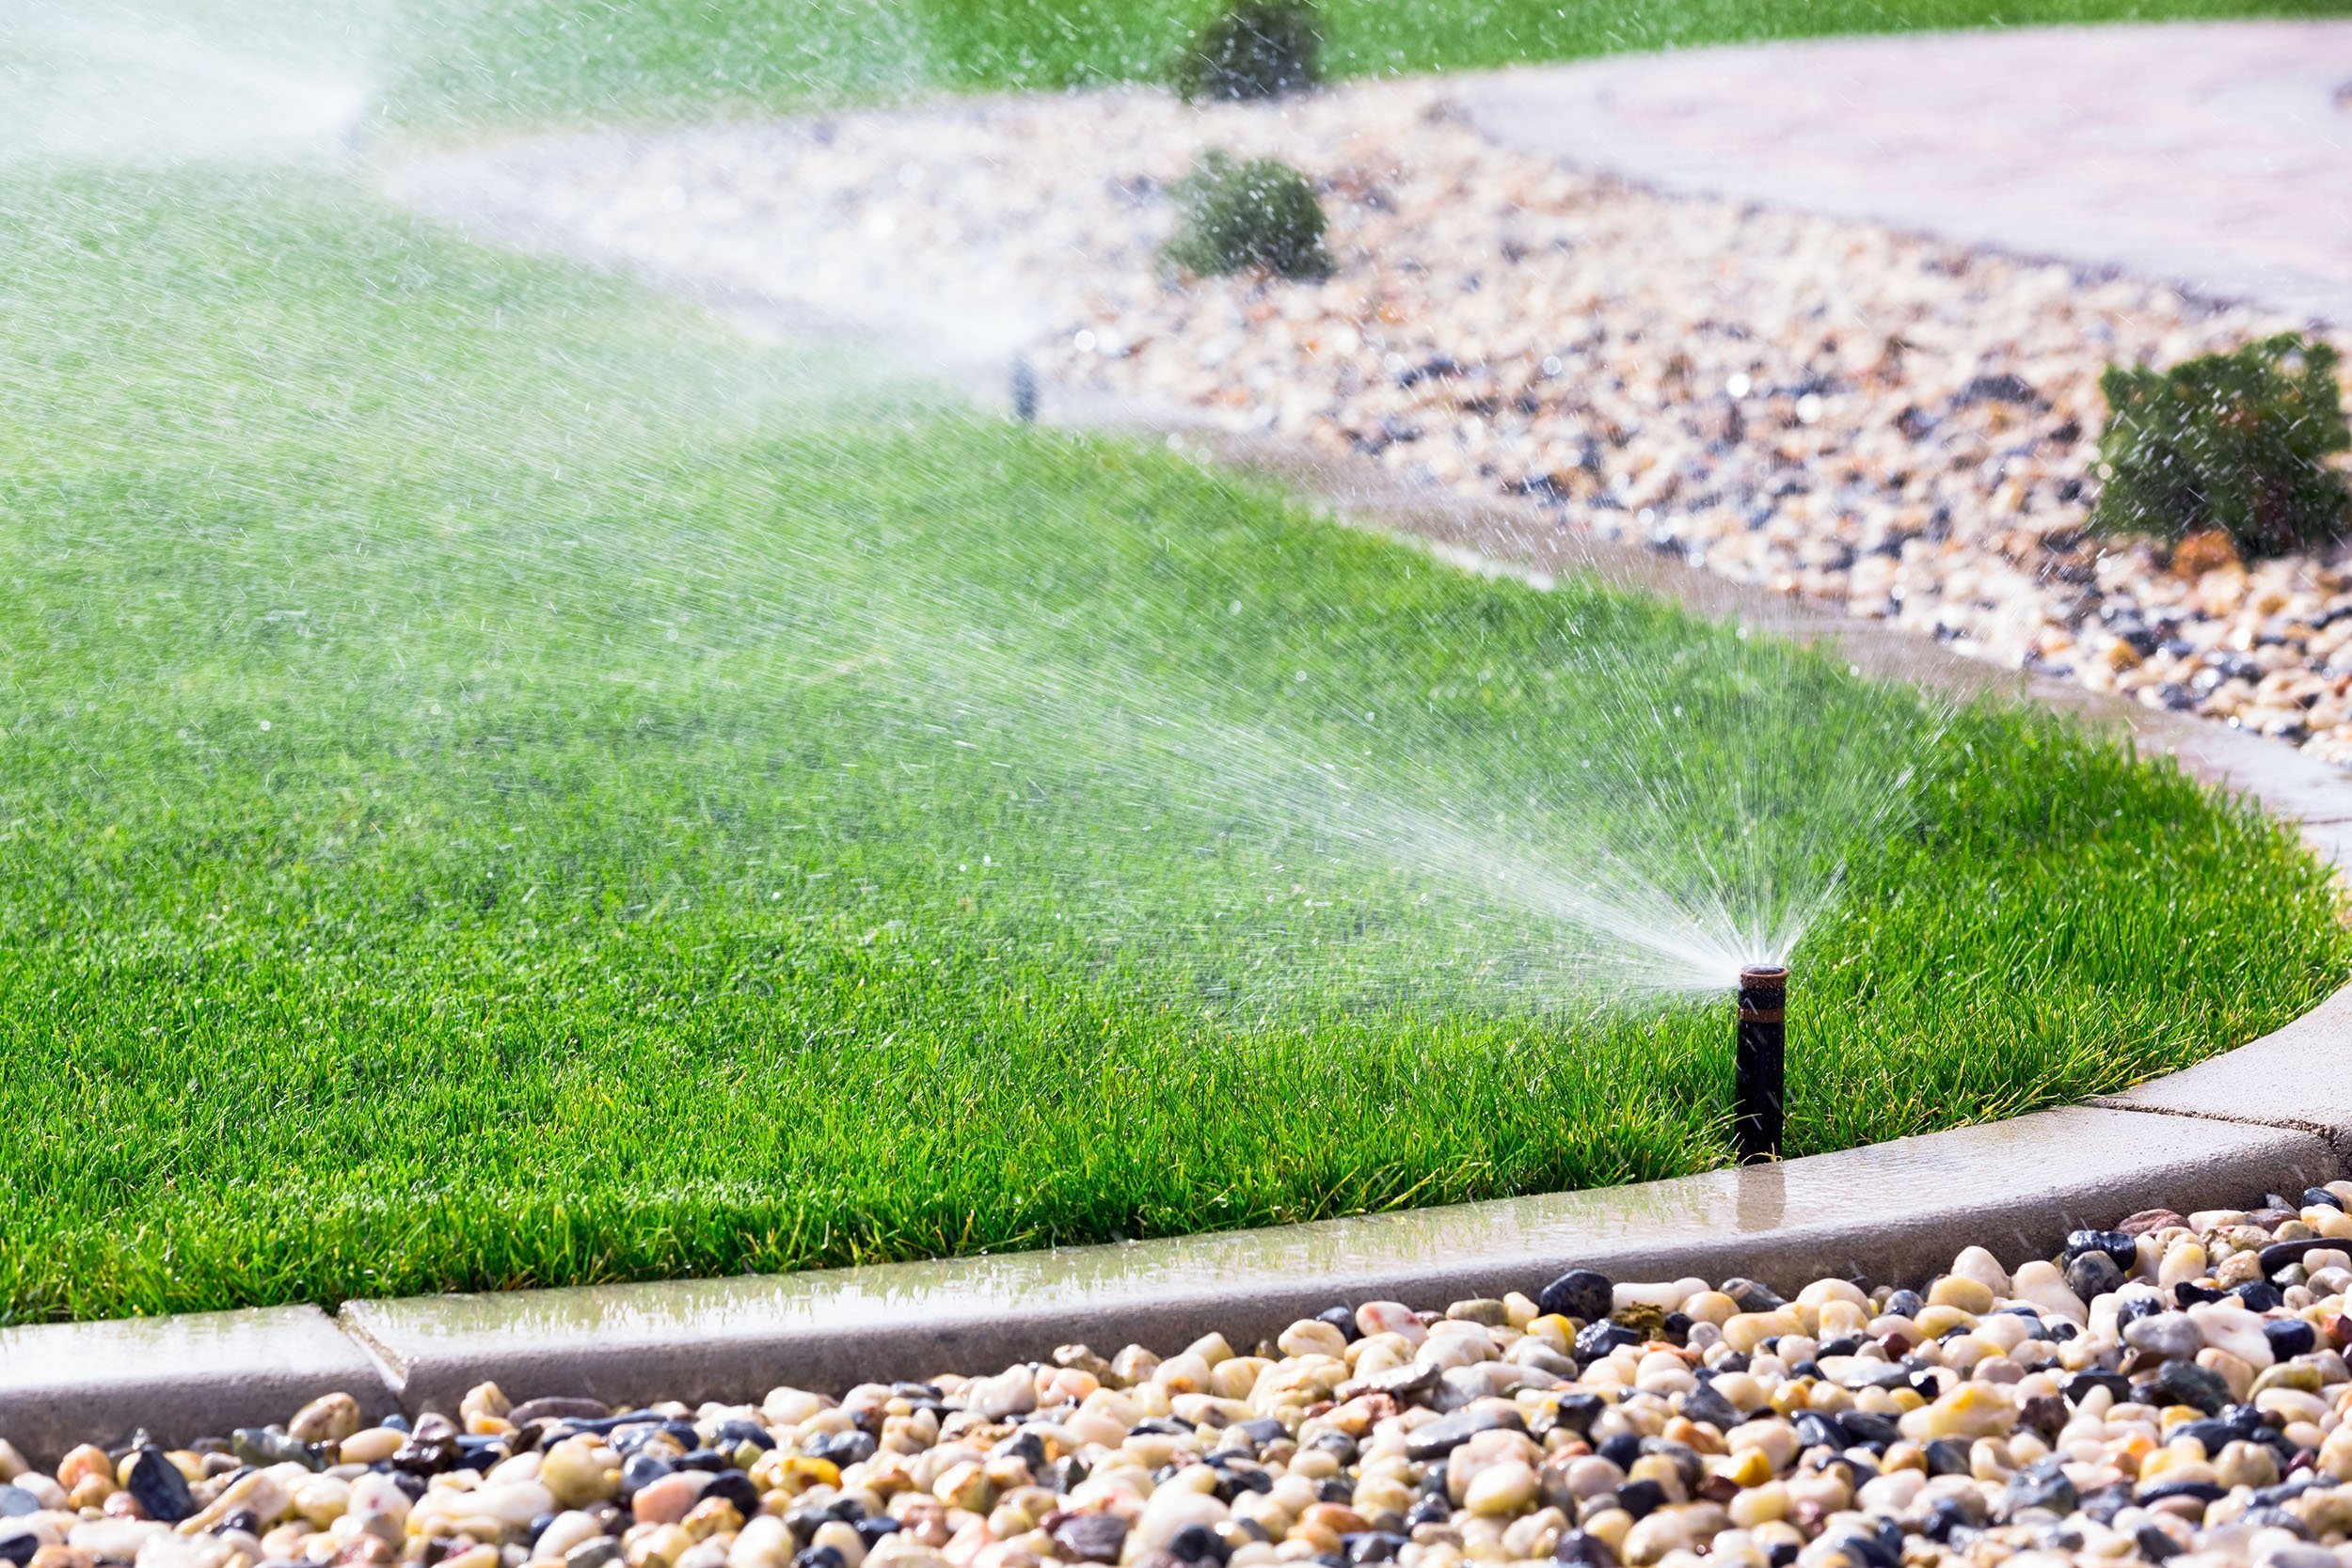 Home irrigation watering a landscaped lawn